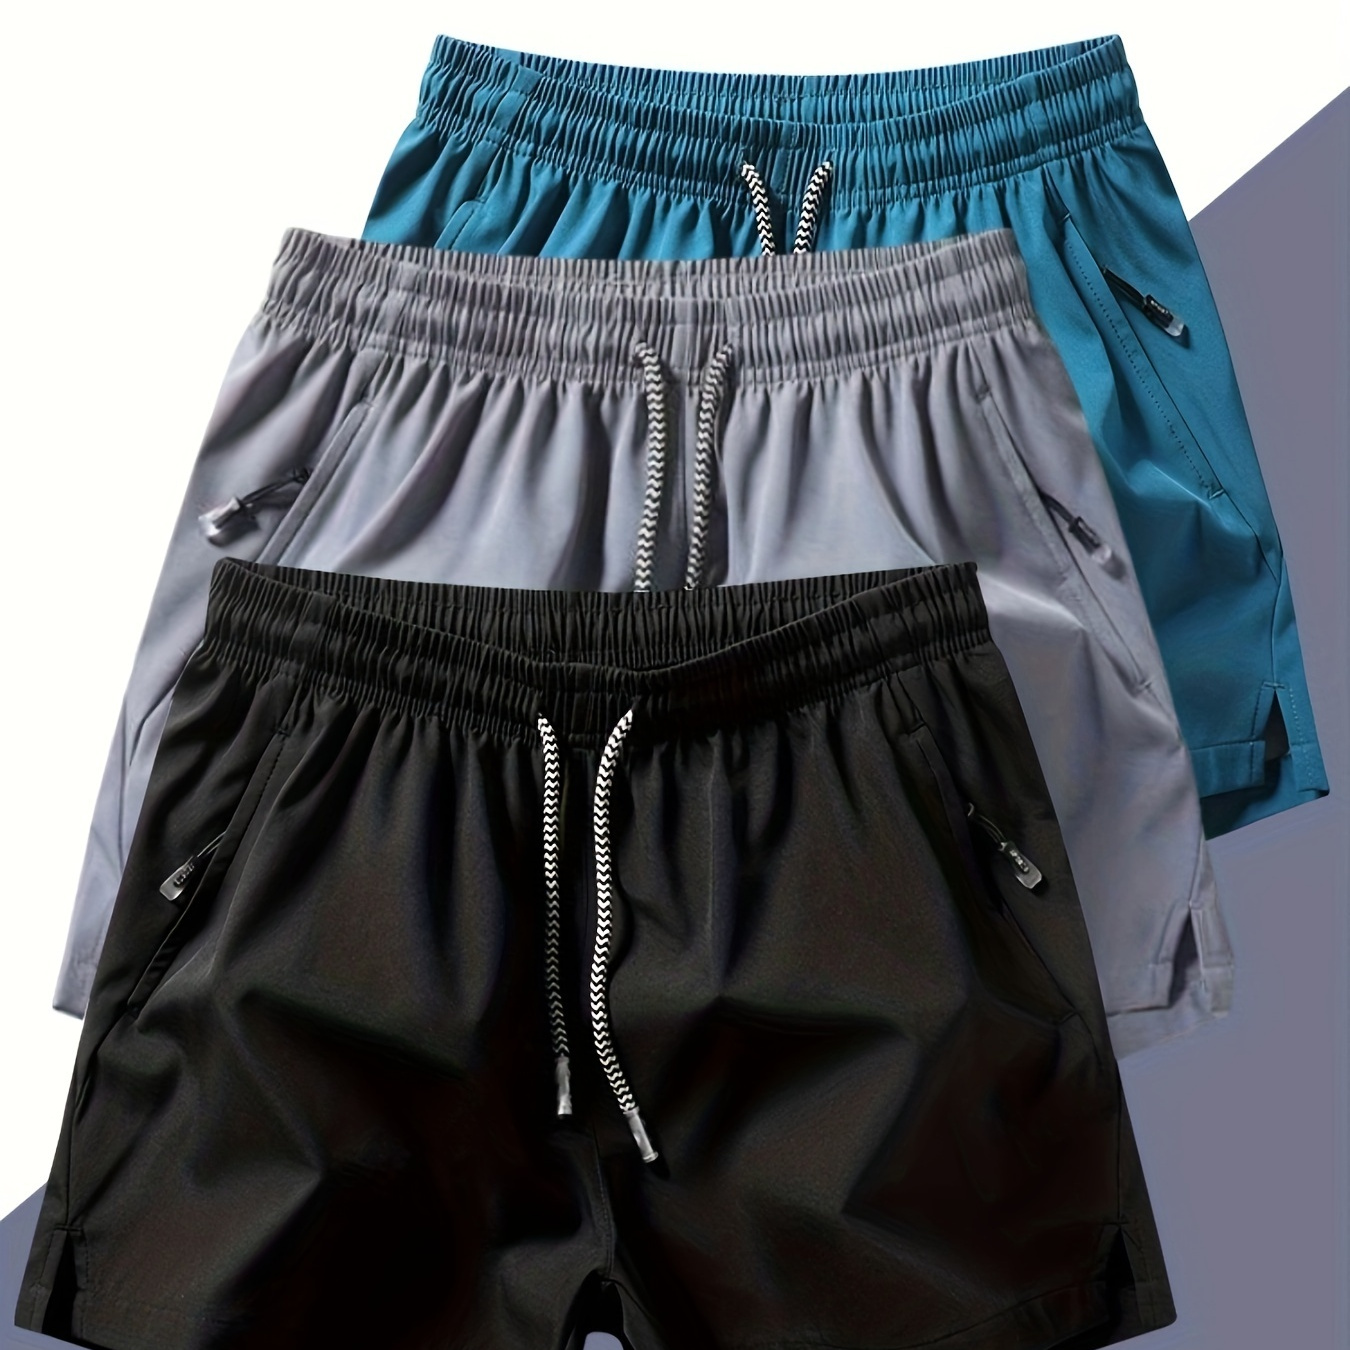 

Men's Three-piece Set Of Solid Color Shorts With Drawstring And Pockets, Casual And Comfy Shorts For Summer Fitness And Outdoors Activities